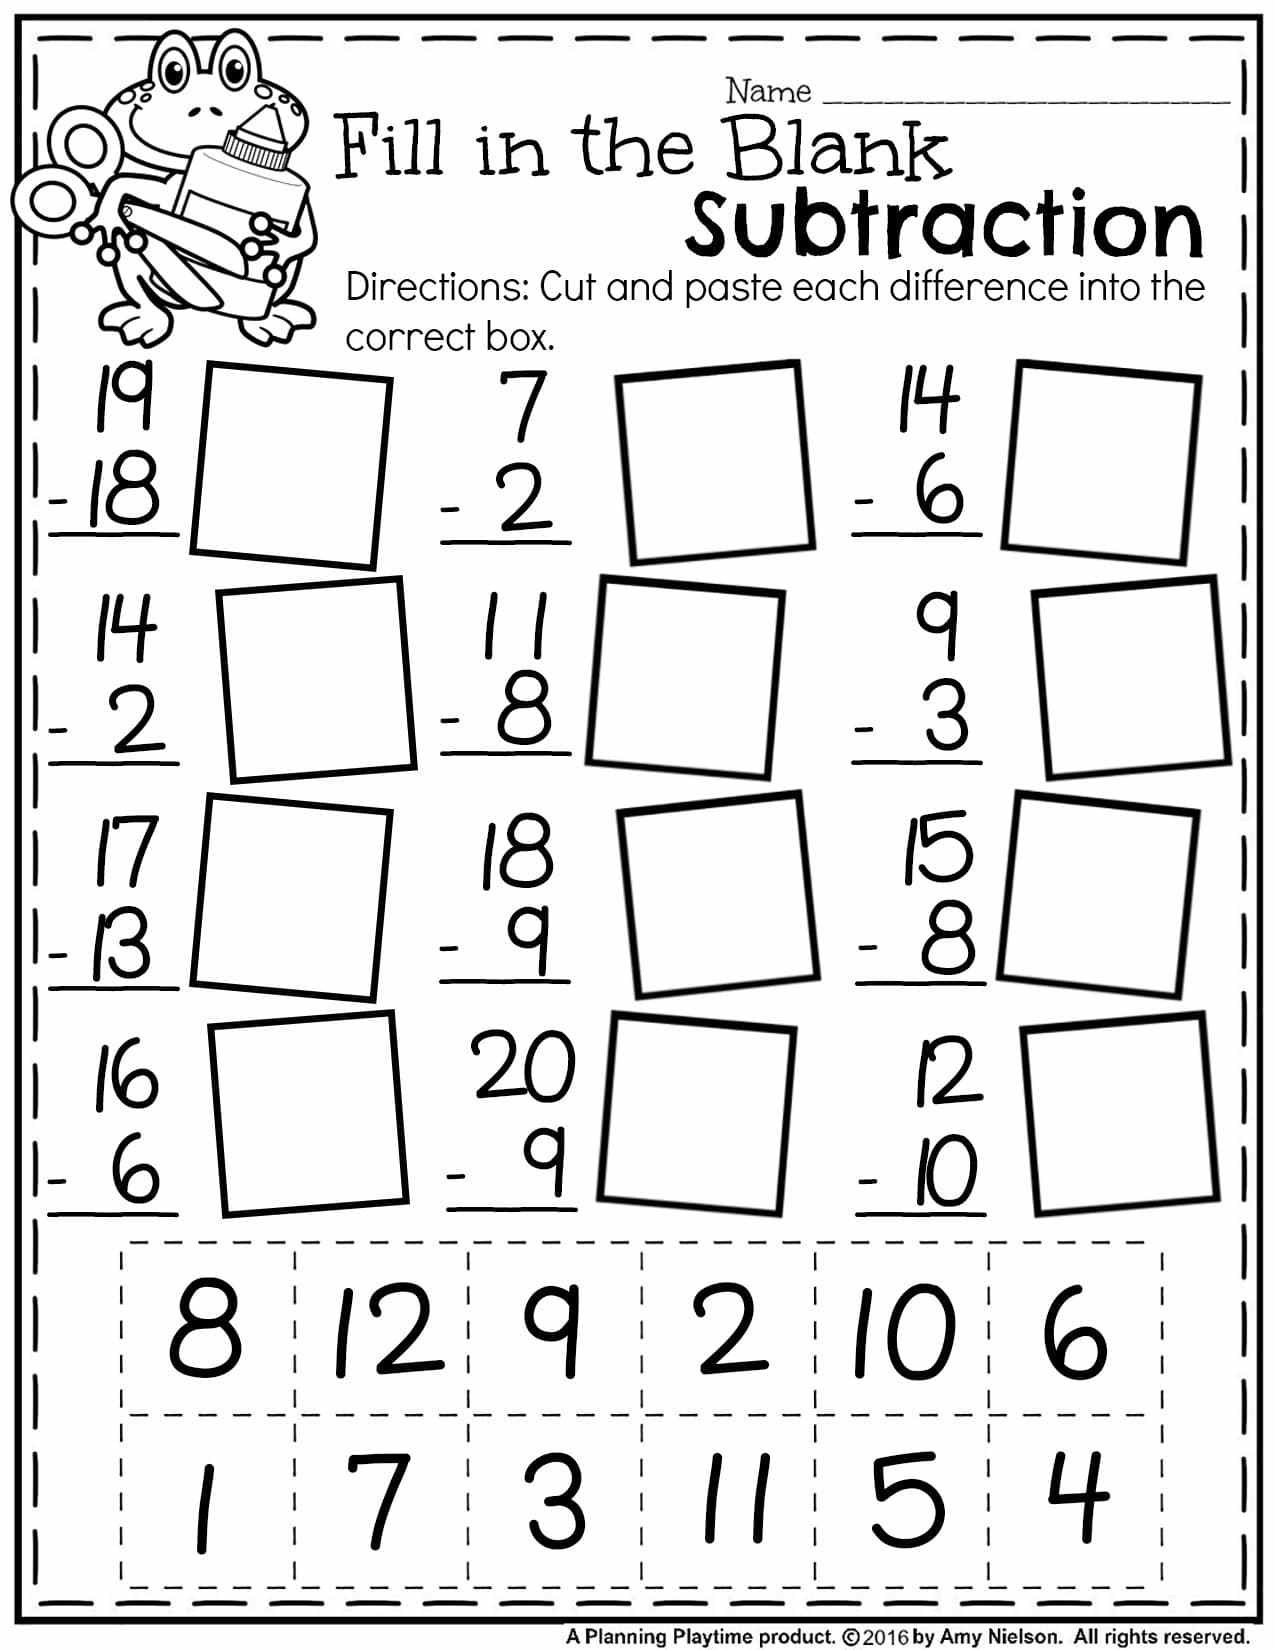 Free First Grade Fraction Worksheets First Grade Fraction Worksheets Free ÙÙ ÙØ³Ø¨Ù ÙÙ ÙØ ÙÙ Ø§ÙØµÙØ±